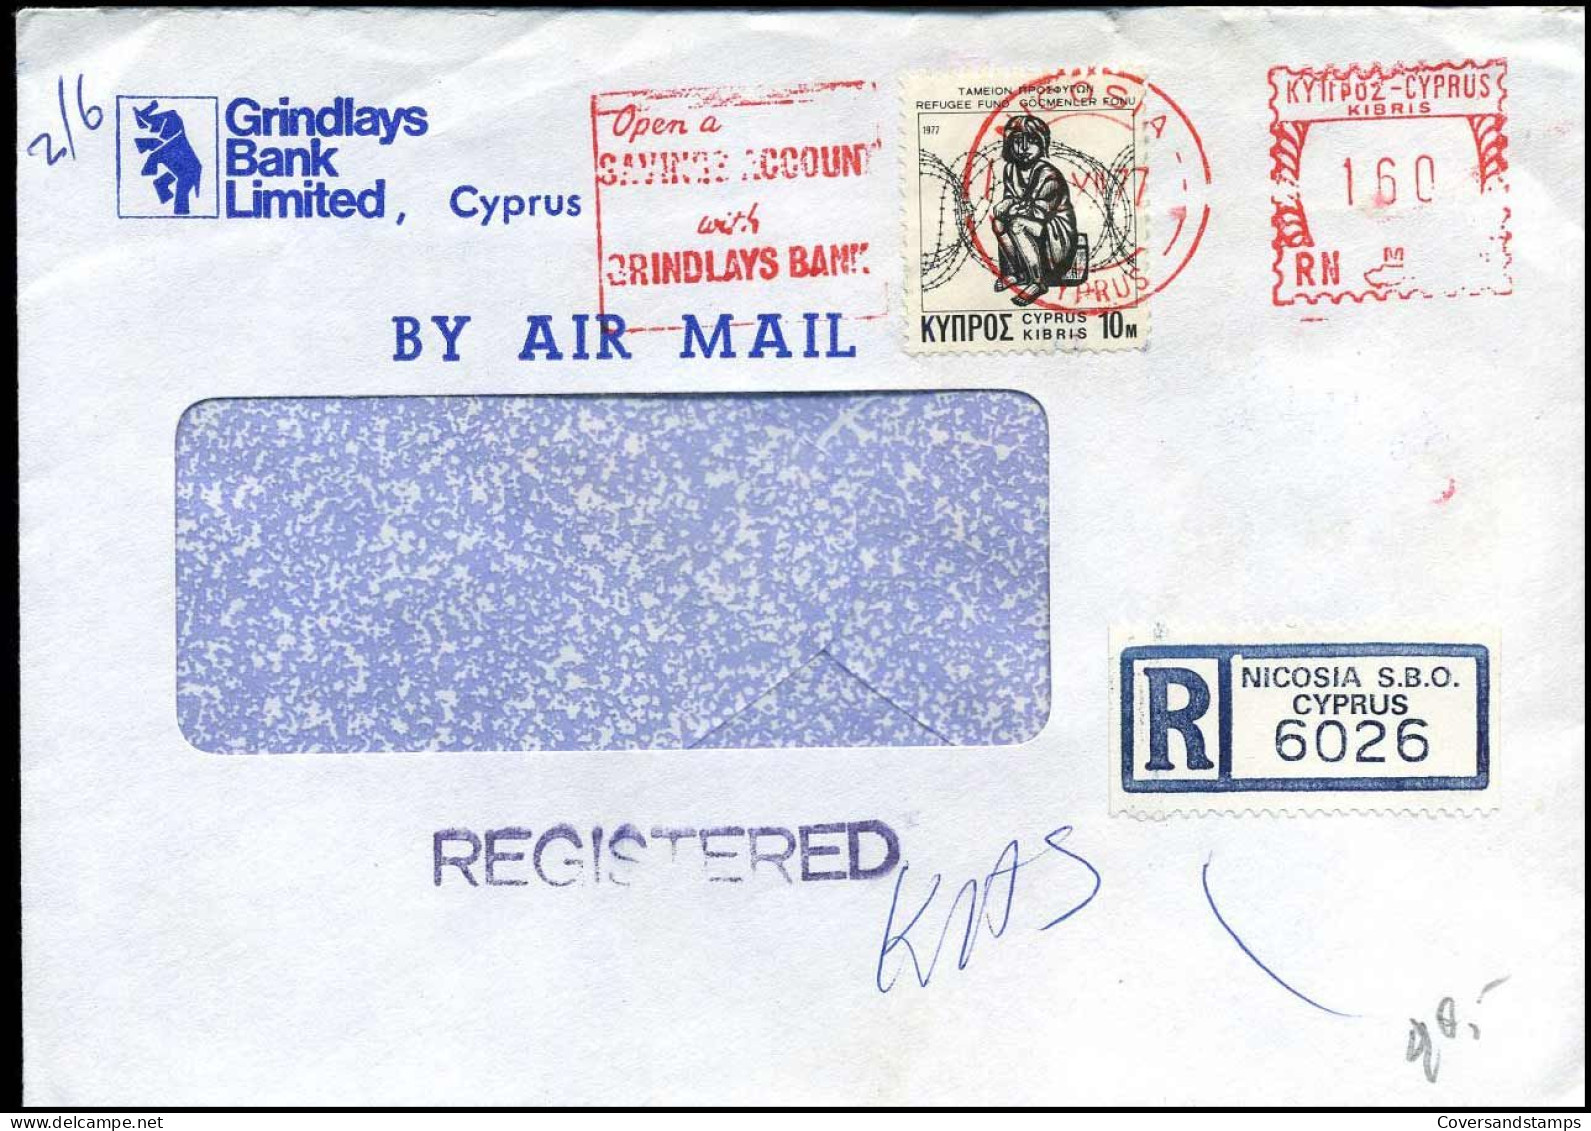 Registered Cover From Cyprus - "Grindlays Bank Limited, Cyprus" - Covers & Documents